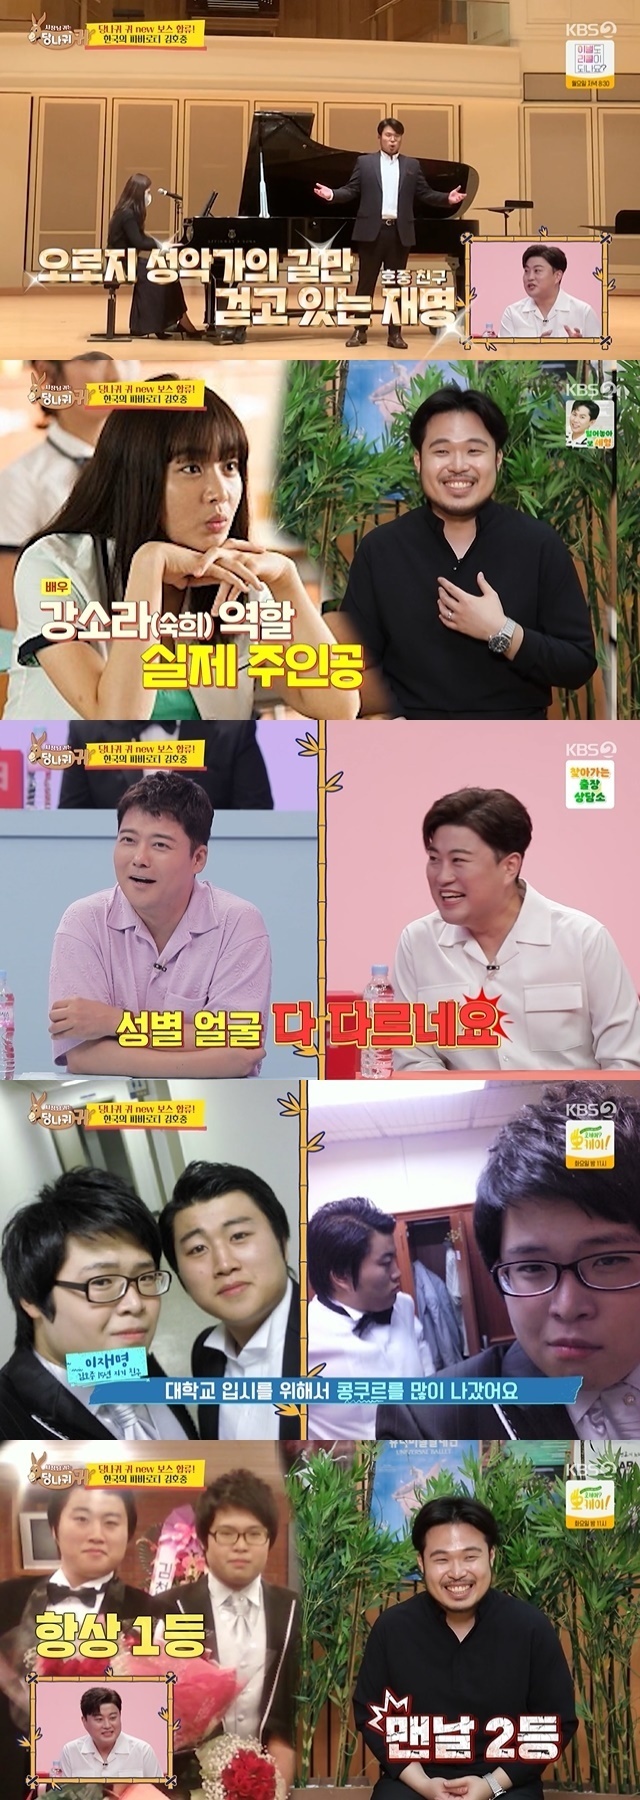 A special Friend of Kim Ho-joong has appeared.In the 165th episode of KBS 2TVs entertainment Boss in the Mirror (hereinafter referred to as The Ass ear), which aired on July 17, singer Kim Ho-joong appeared as a new boss.On this day, Kim Ho-joong met Kimcheon Arts High School Friend and vocalist Lee Jae-myung; the legendary tenor Placido wants his help ahead of the stage with Domingo.Lee Jae-myung was surprised to find that the role of Kang So-ra actor in the movie My Paparotti is my role.Jeon Hyun-moo commented, Every face of sex is different.Lee Jae-myung said, I went to 9M113 Konkurs competitions for college entrance examination. When I went out, I was the first and I was the second.I always have second place, so I do not have a first title. On the other hand, Kim Ho-joong introduced Lee Jae-myung as a good friend who helped me to make my deans days beautiful and come up to this place while going to the competition together.